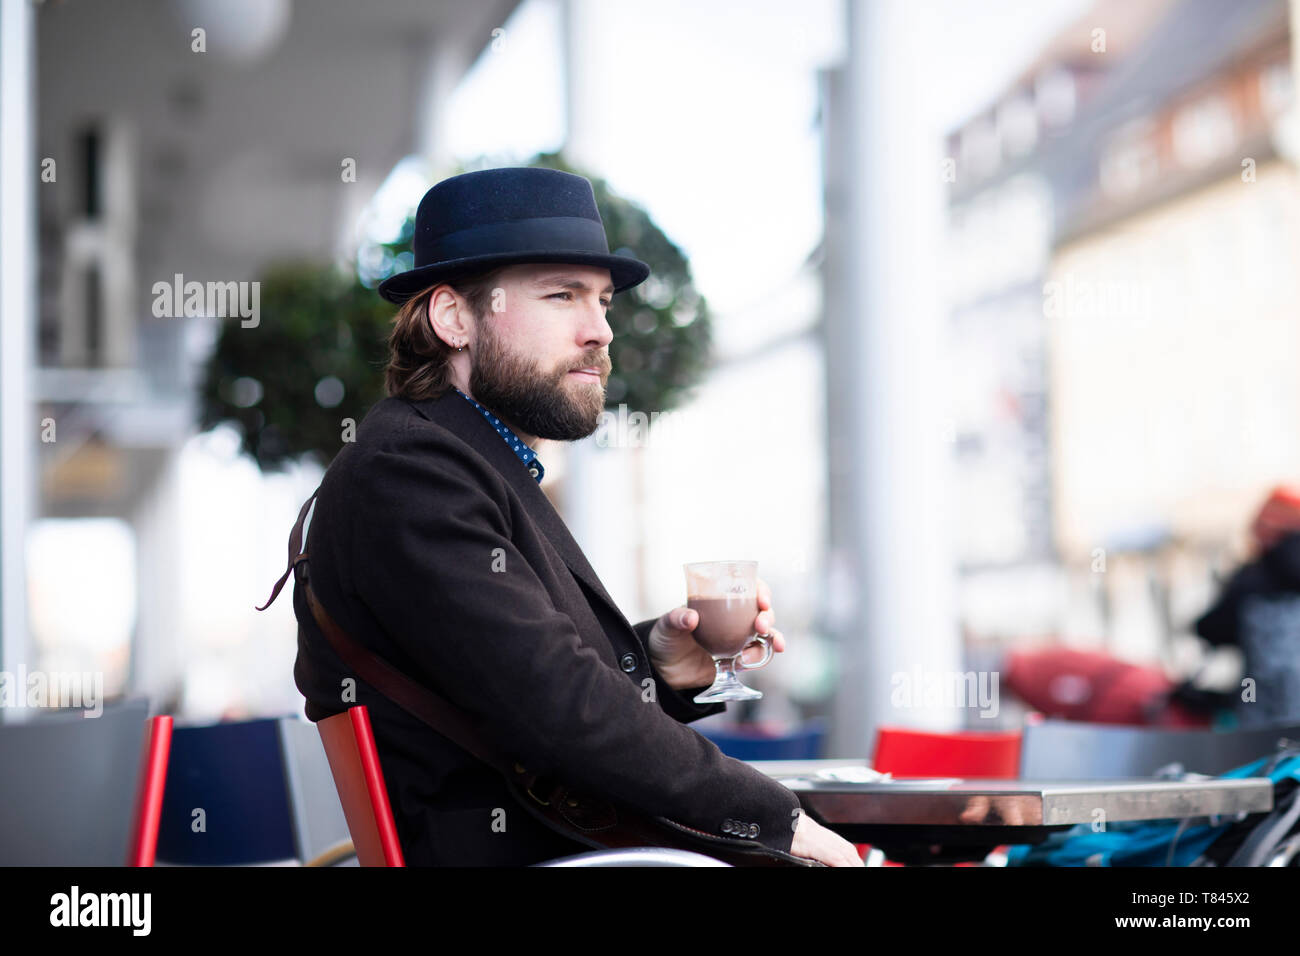 Man in trilby sitting at sidewalk cafe table Stock Photo